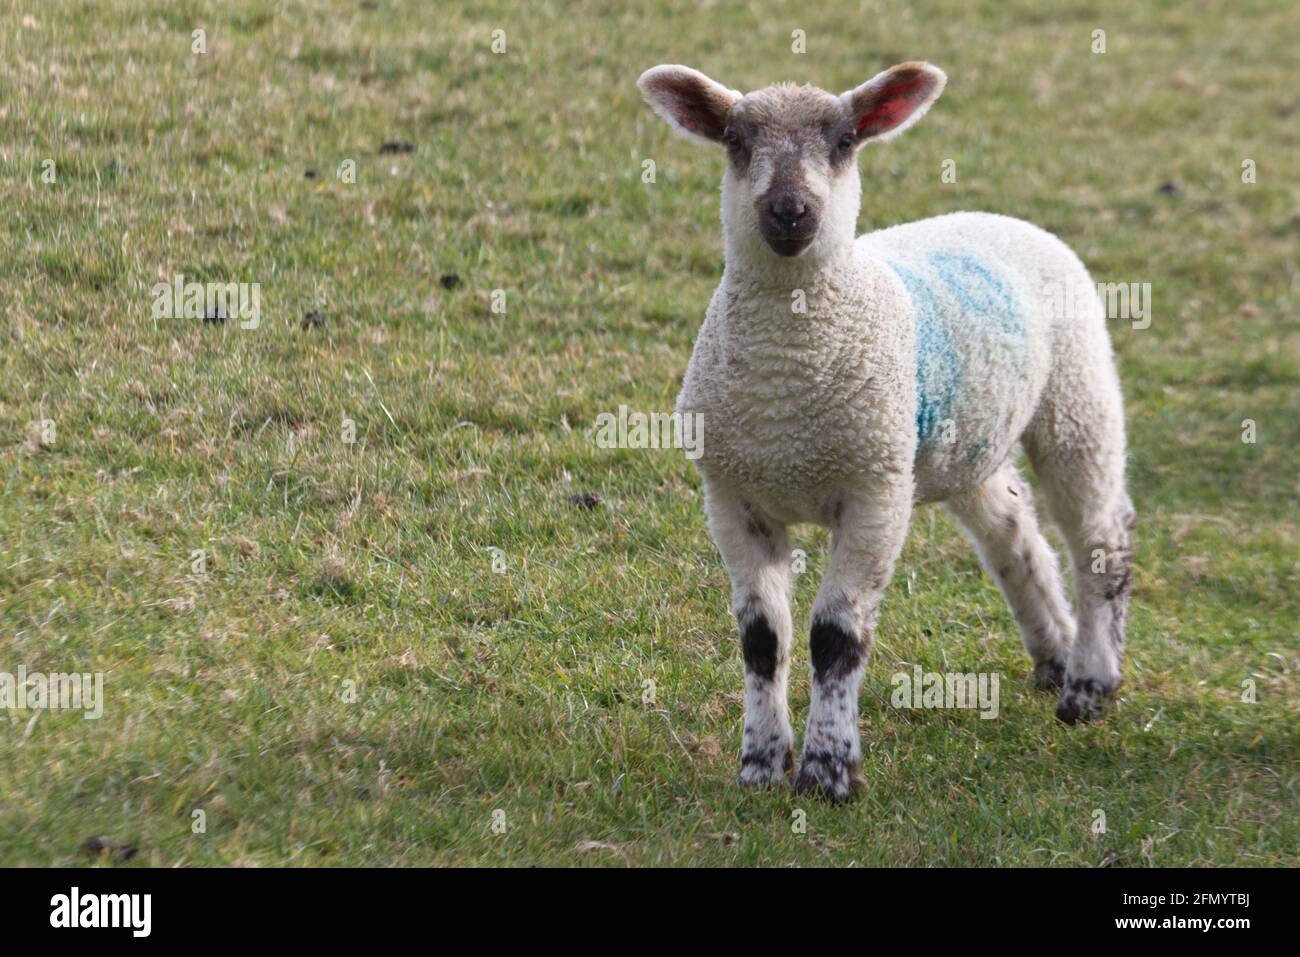 Single lamb standing on a meadow Stock Photo